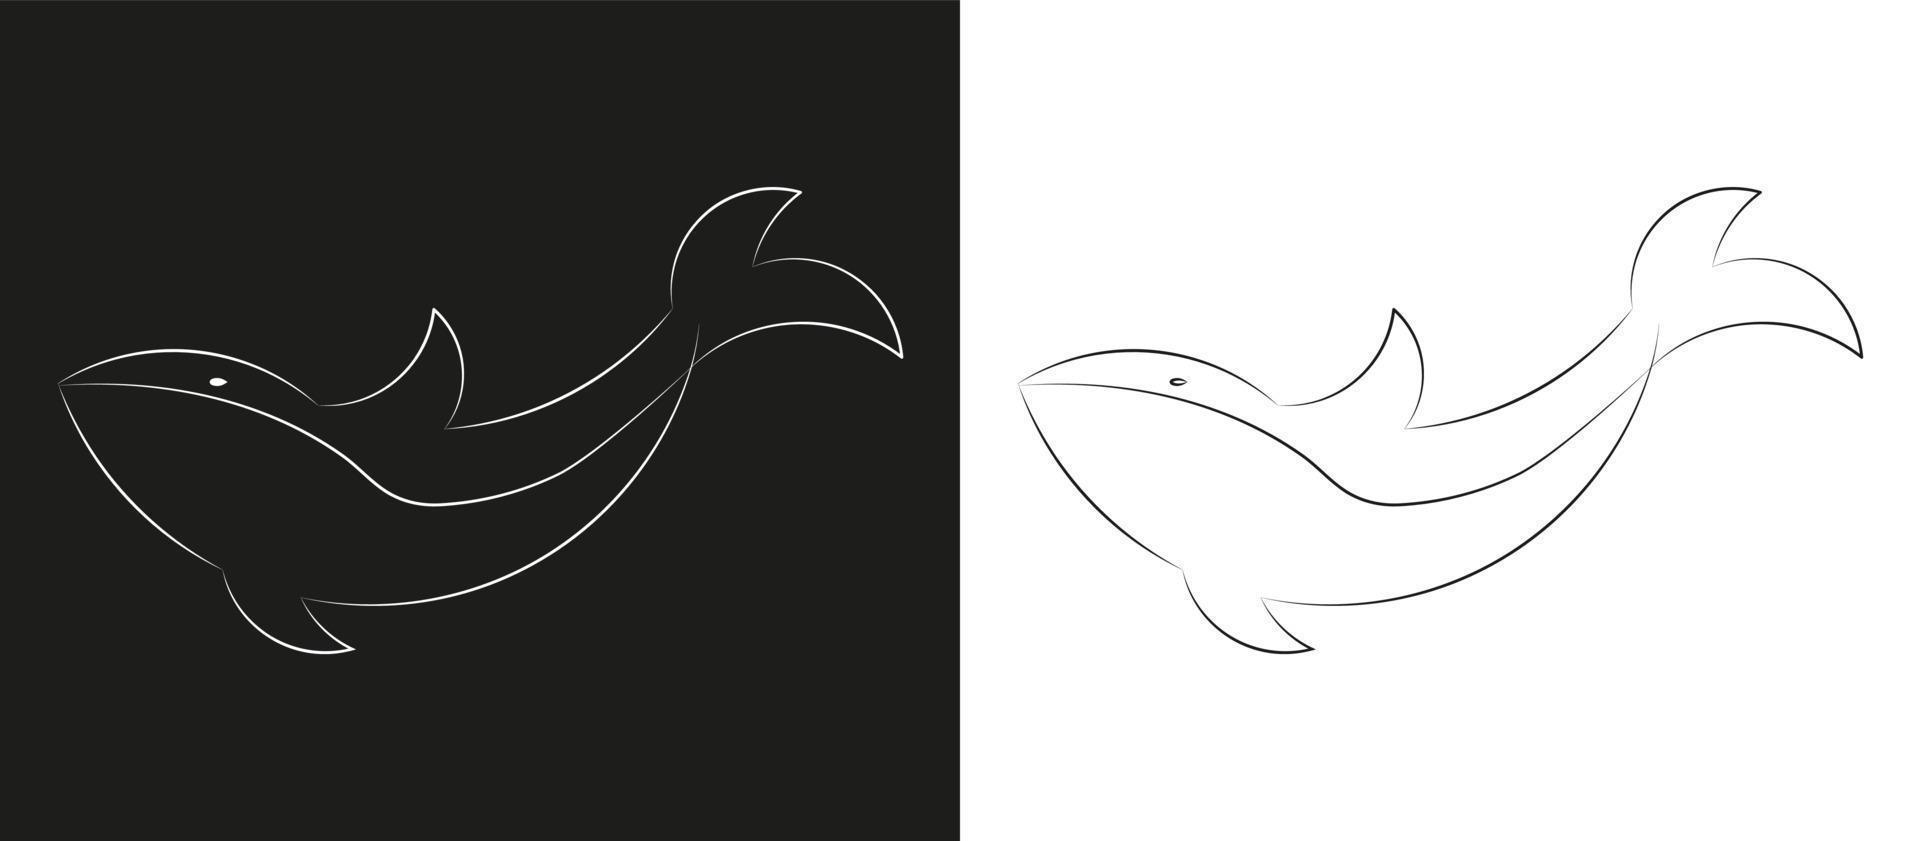 Whale icon for logo, banners, web design, fabric. Black and white line art whale on black and white background vector